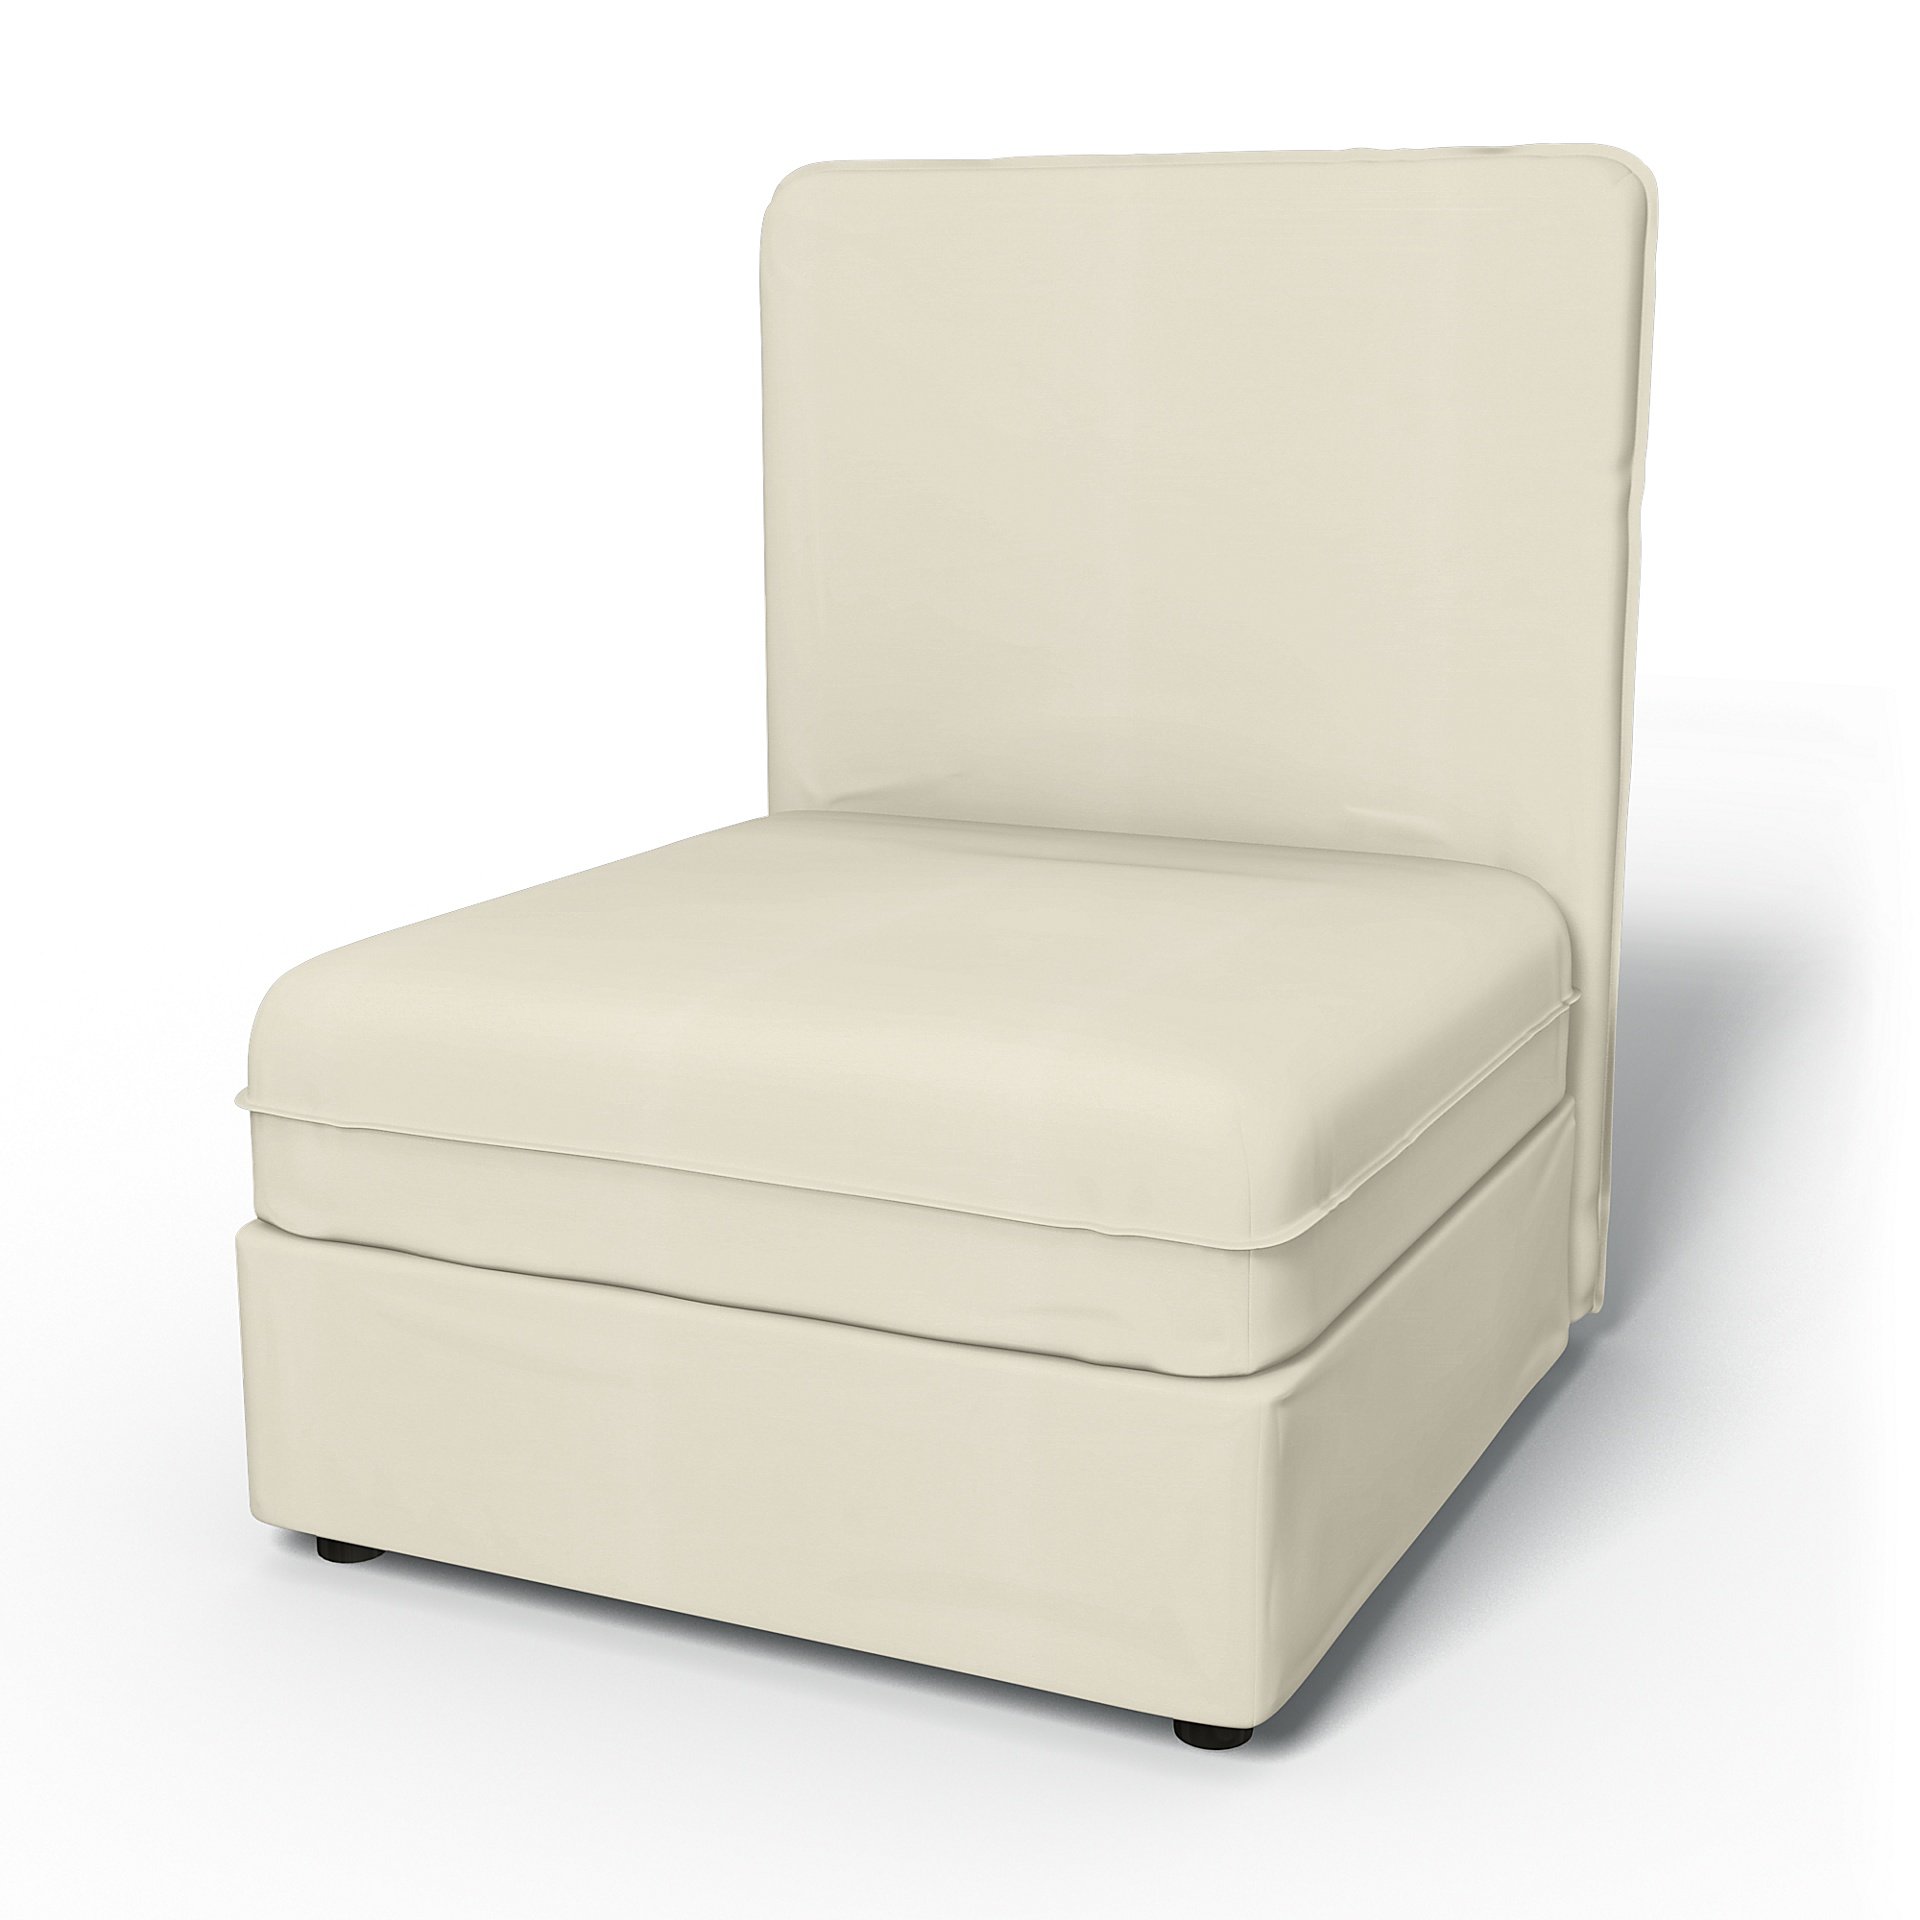 IKEA - Vallentuna Seat Module with High Back and Storage Cover 80x100cm 32x39in, Tofu, Cotton - Bemz